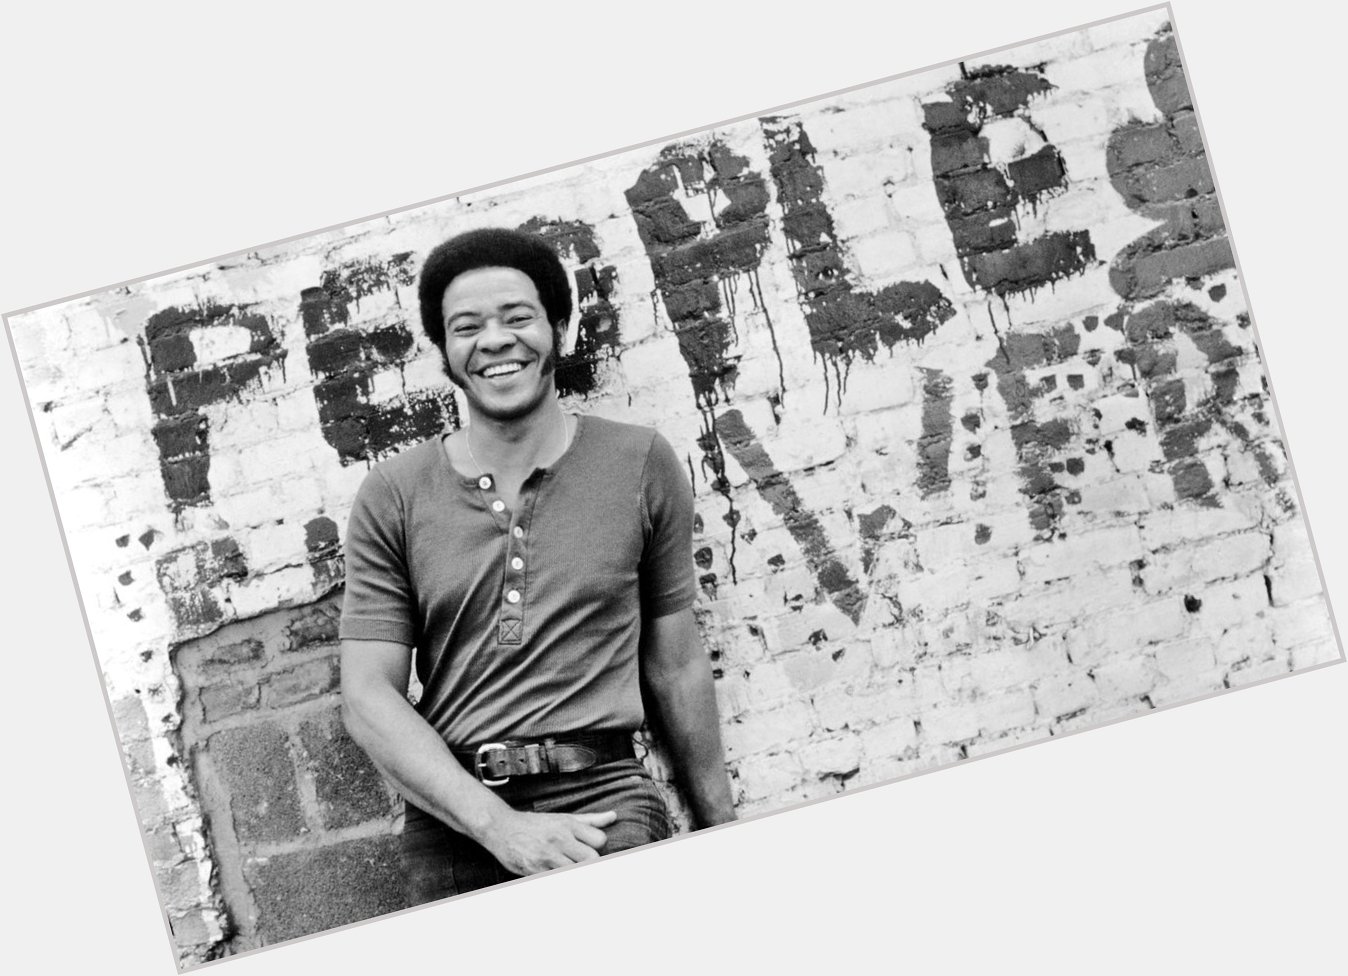 Happy birthday to Rock and Roll Hall of Famer, Bill Withers! 